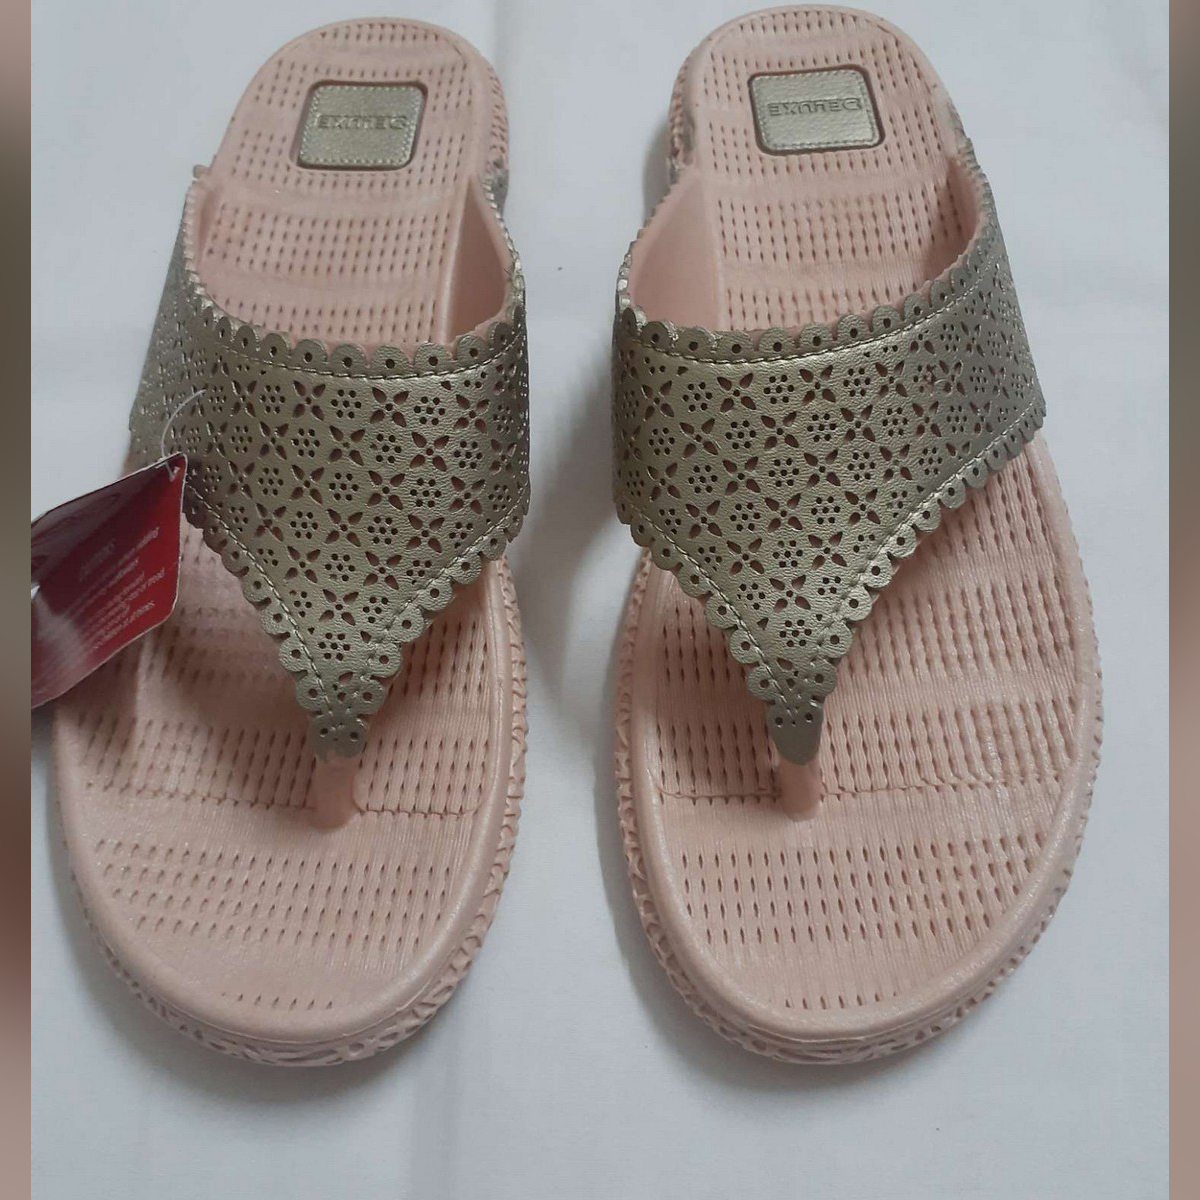 Plastic Causal Chappal For Women Price in Pakistan - View Latest ...